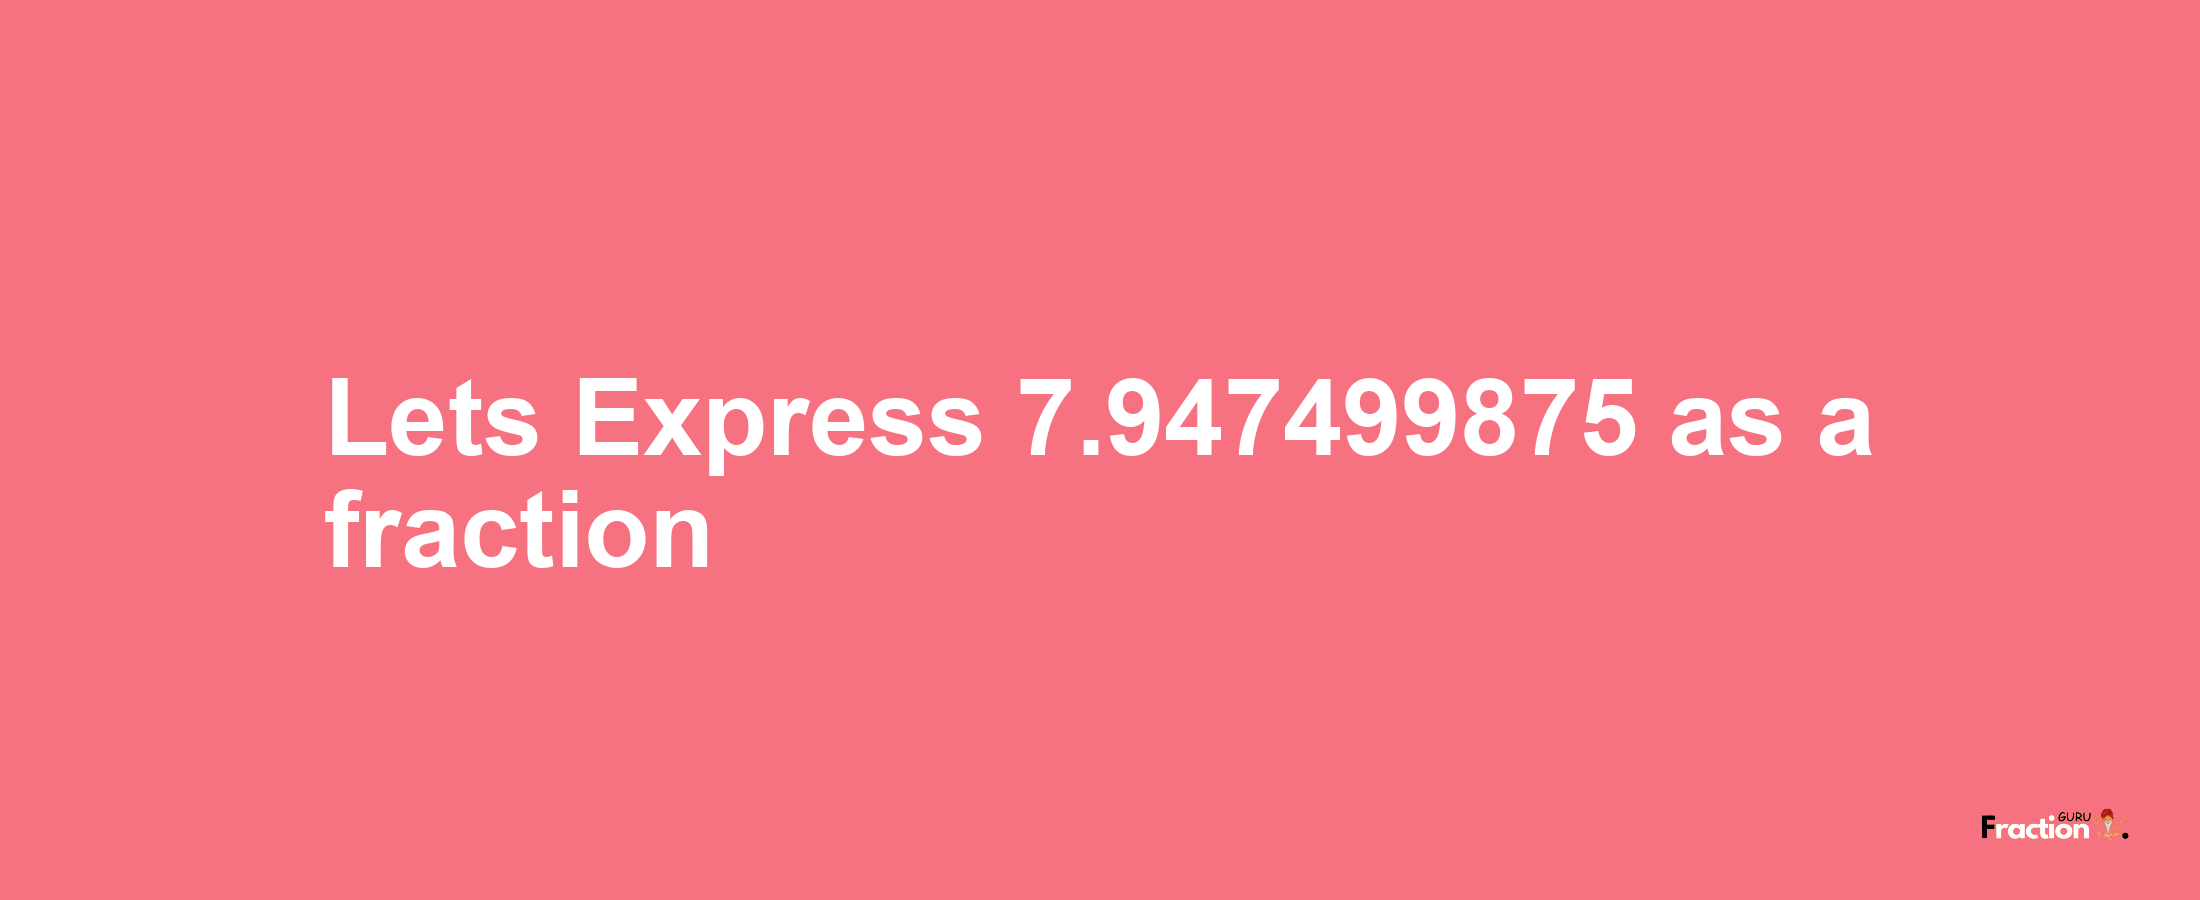 Lets Express 7.947499875 as afraction